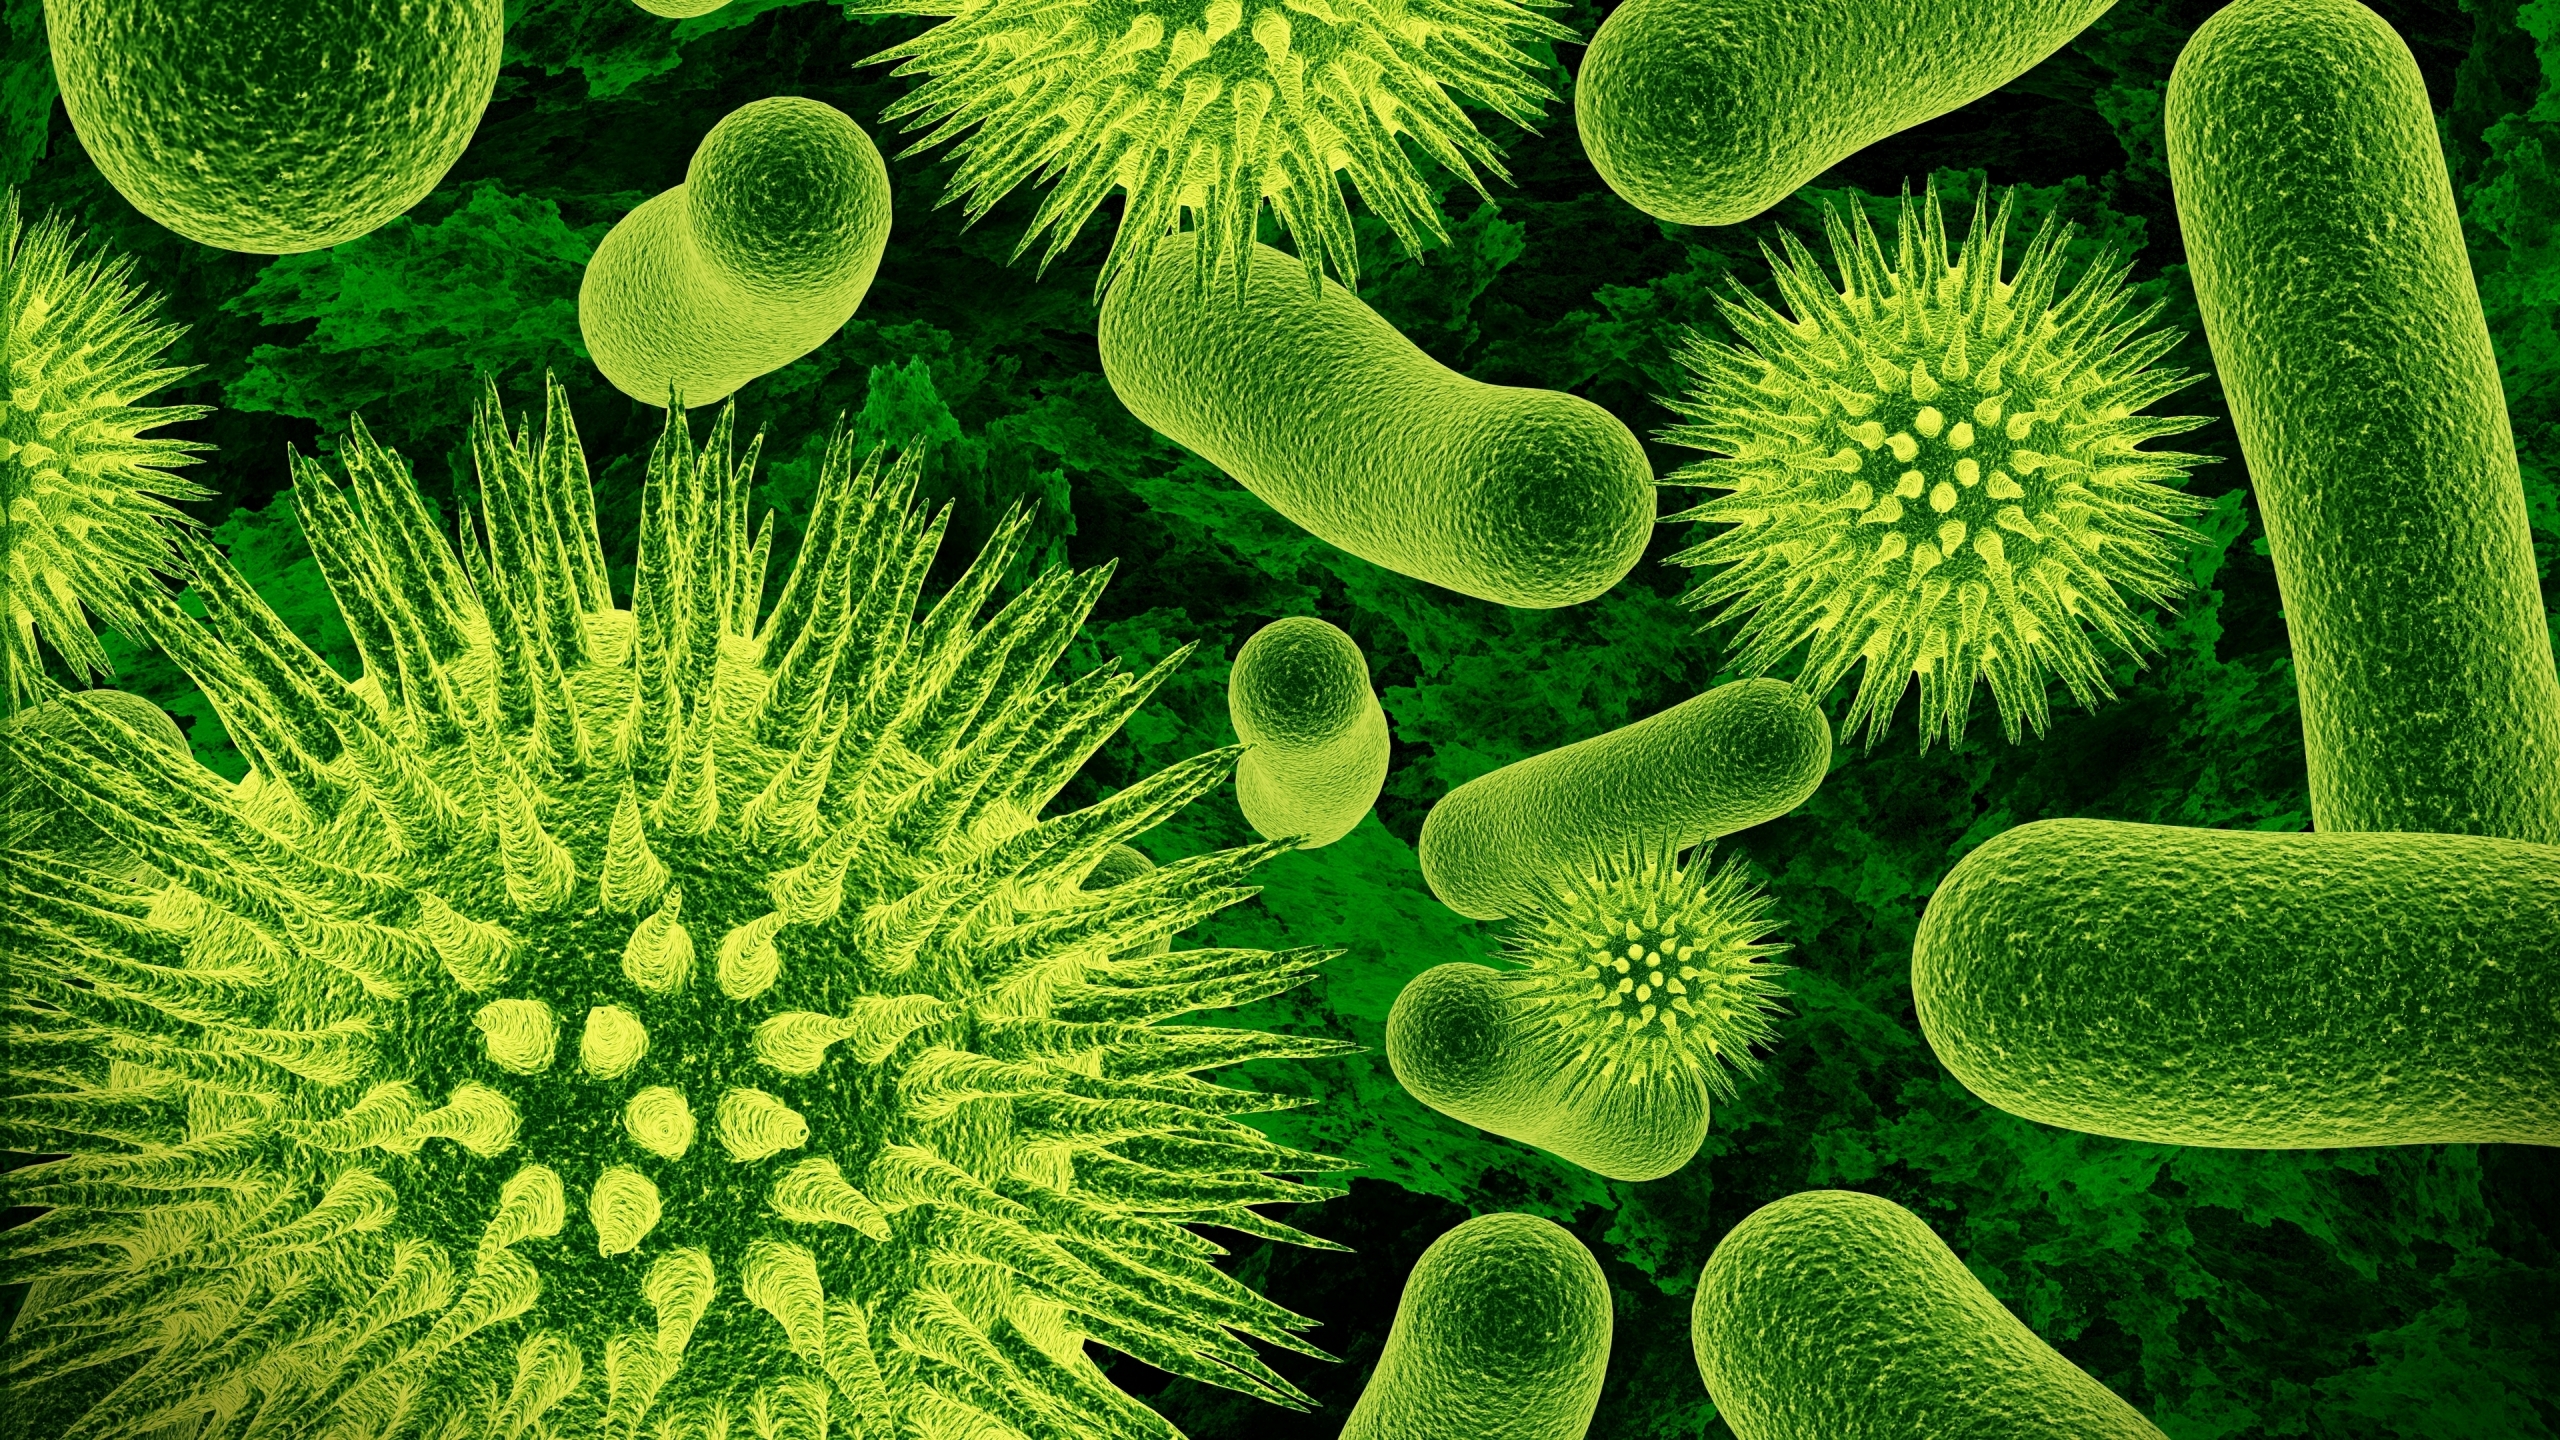 Bacteria for 2560x1440 HDTV resolution